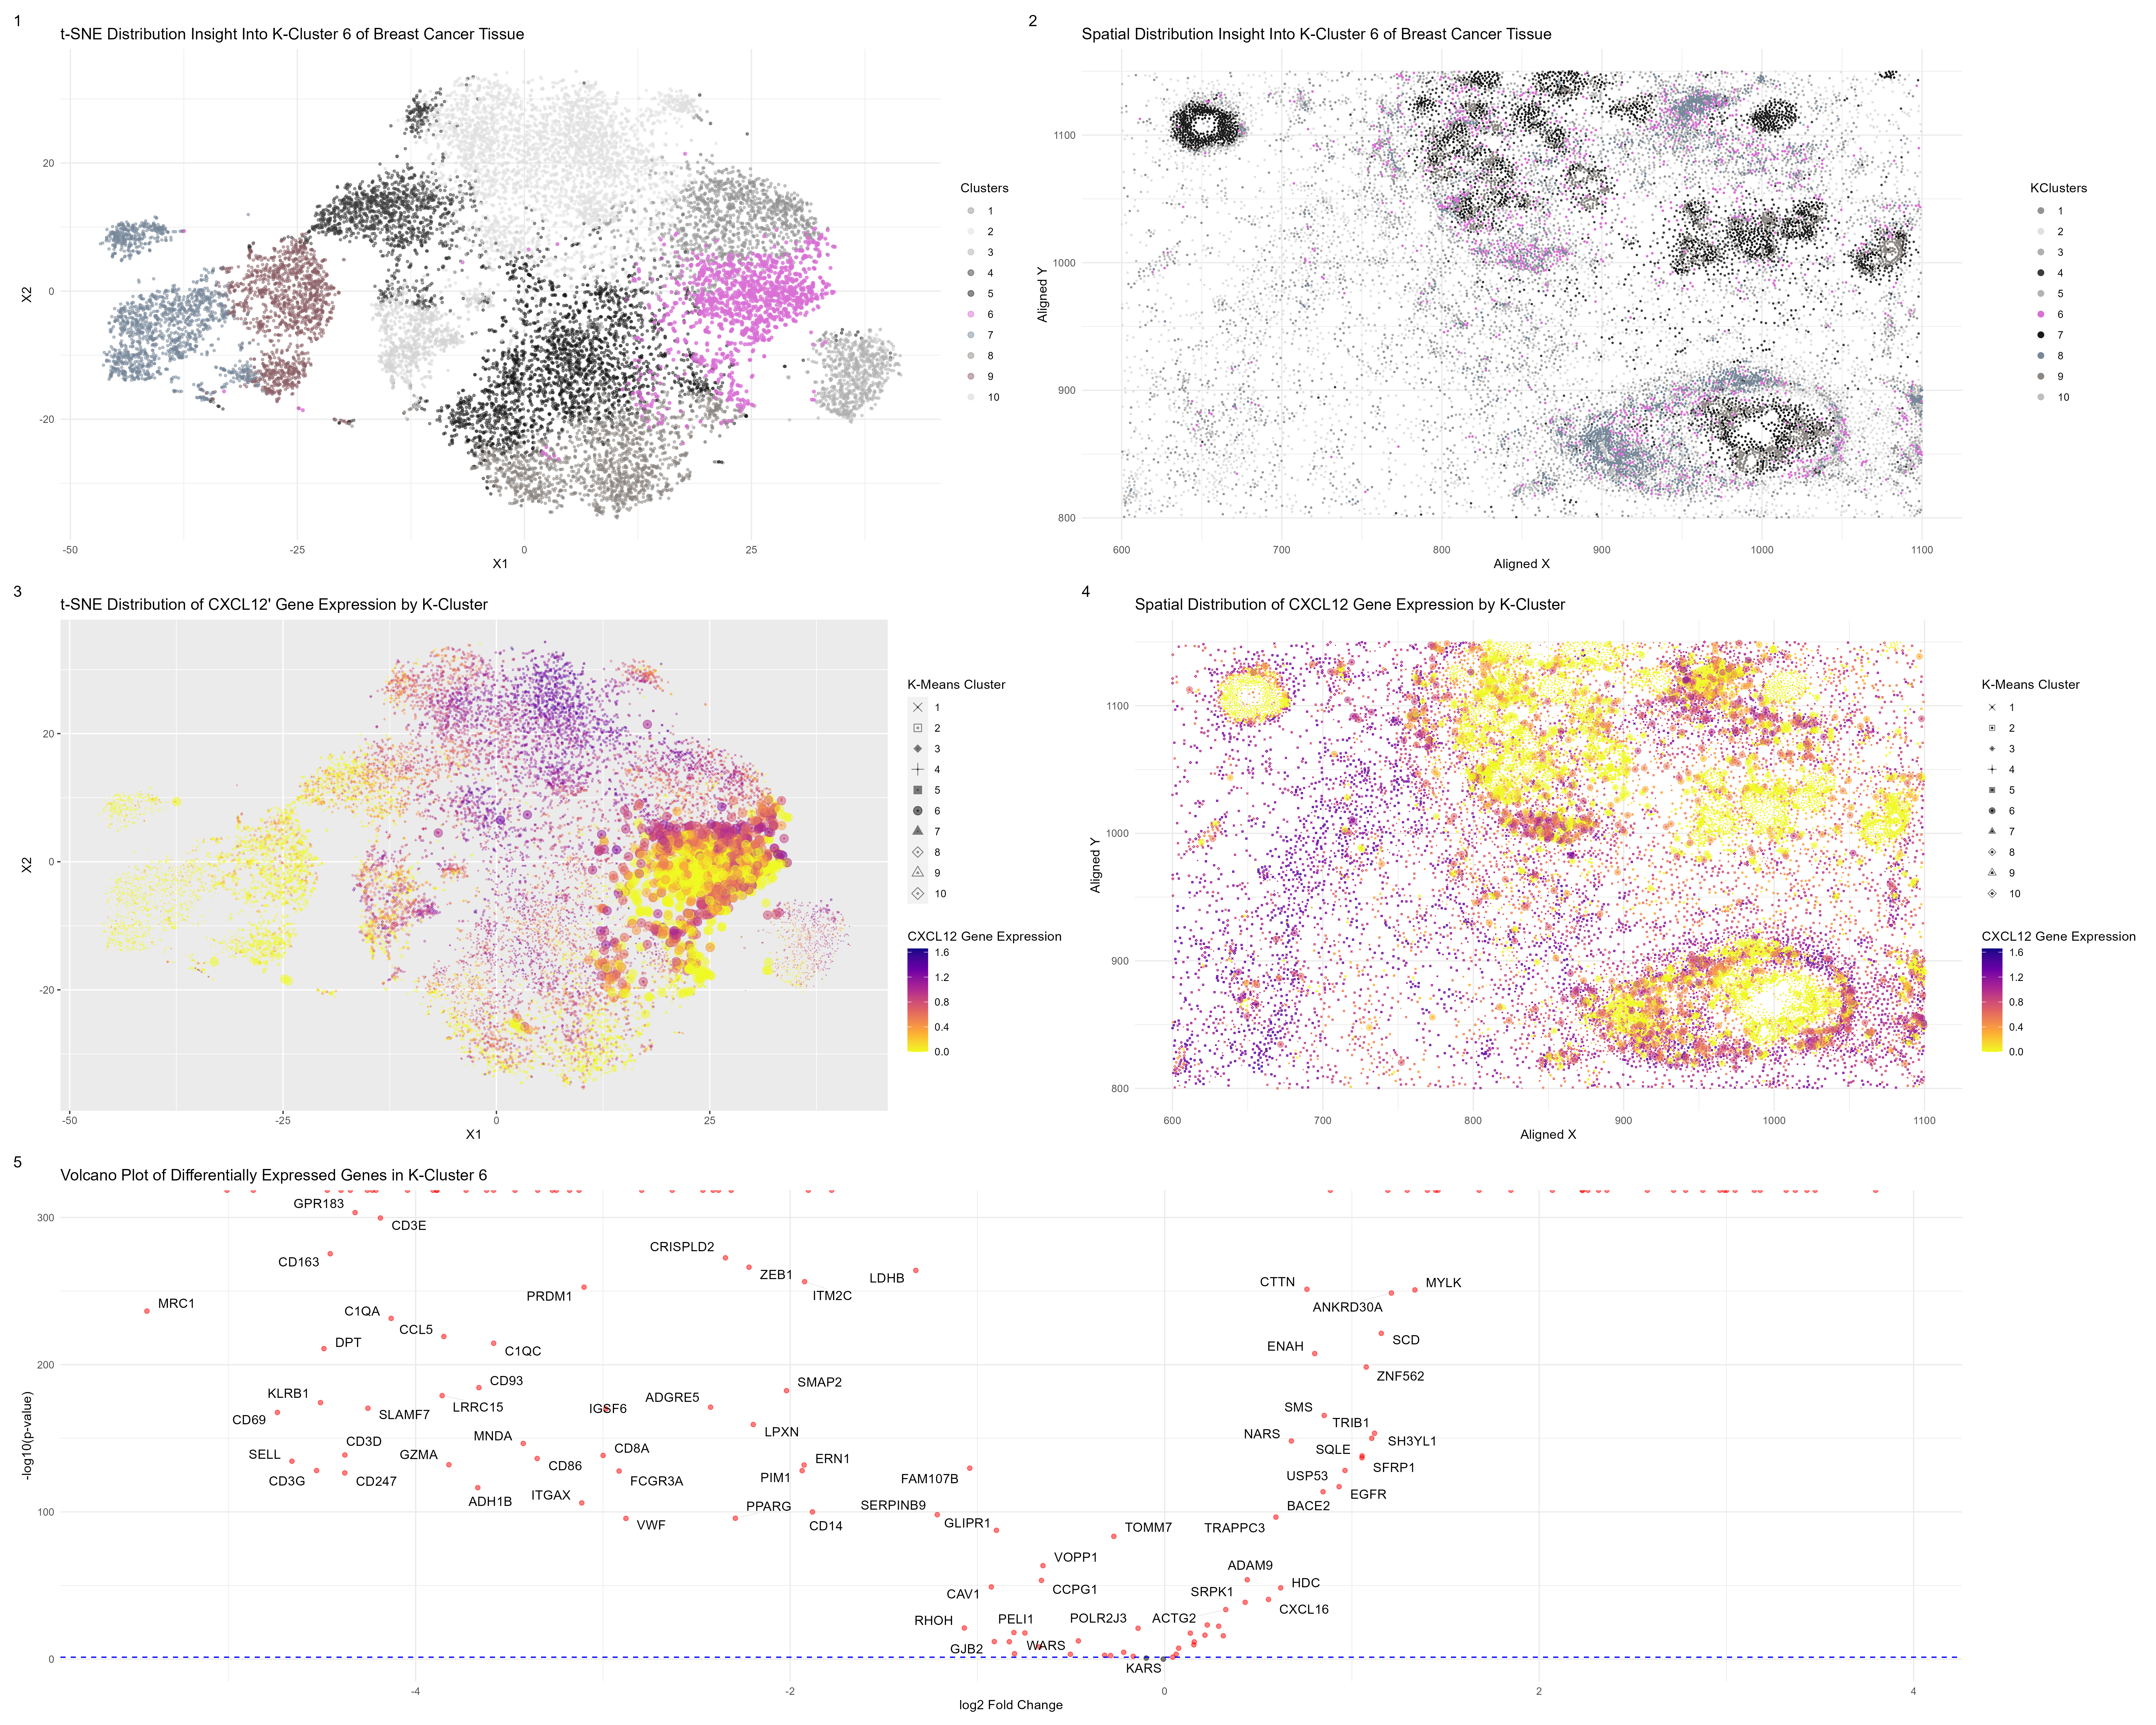 Identifying DCIS & Stromal Cells in Imaging Spatial Transcriptomics Data Through K-Means Cluster Analysis